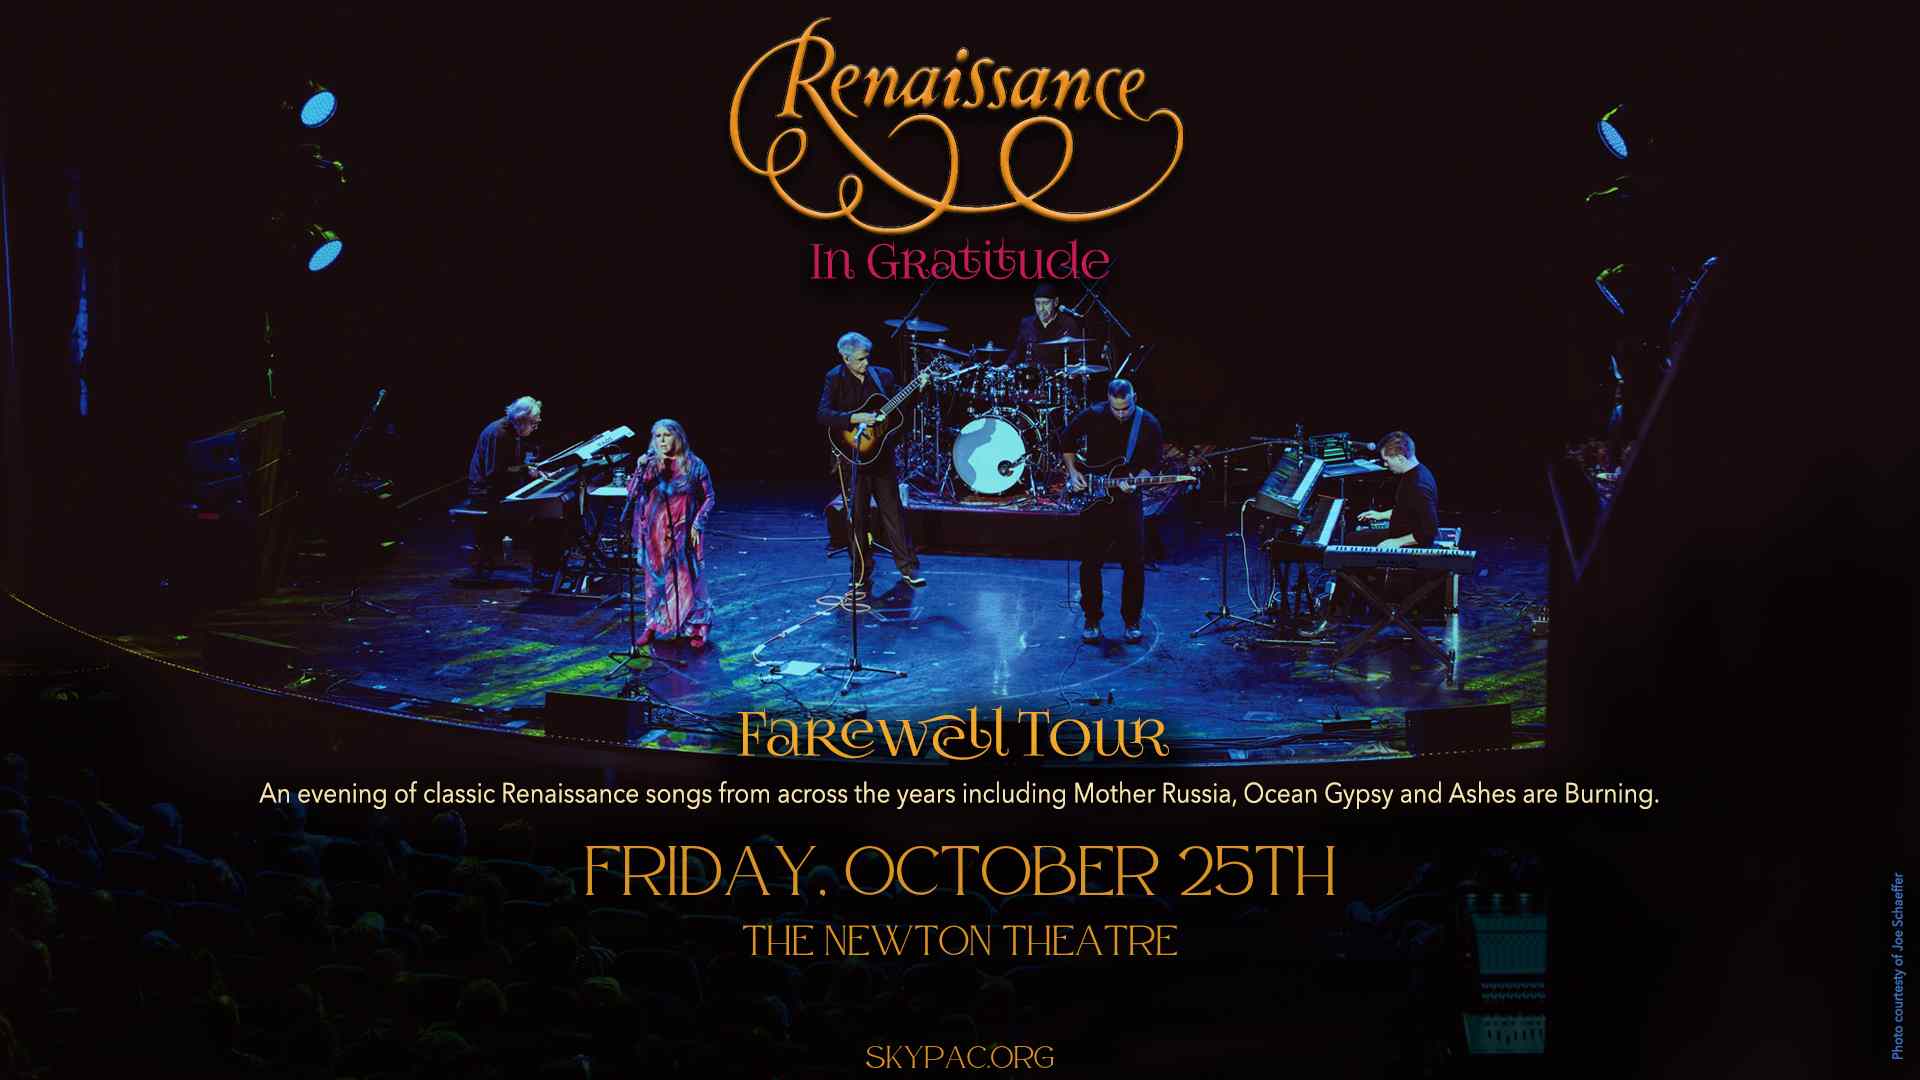 Renaissance comes to The Newton Theatre on Friday, October 25th.